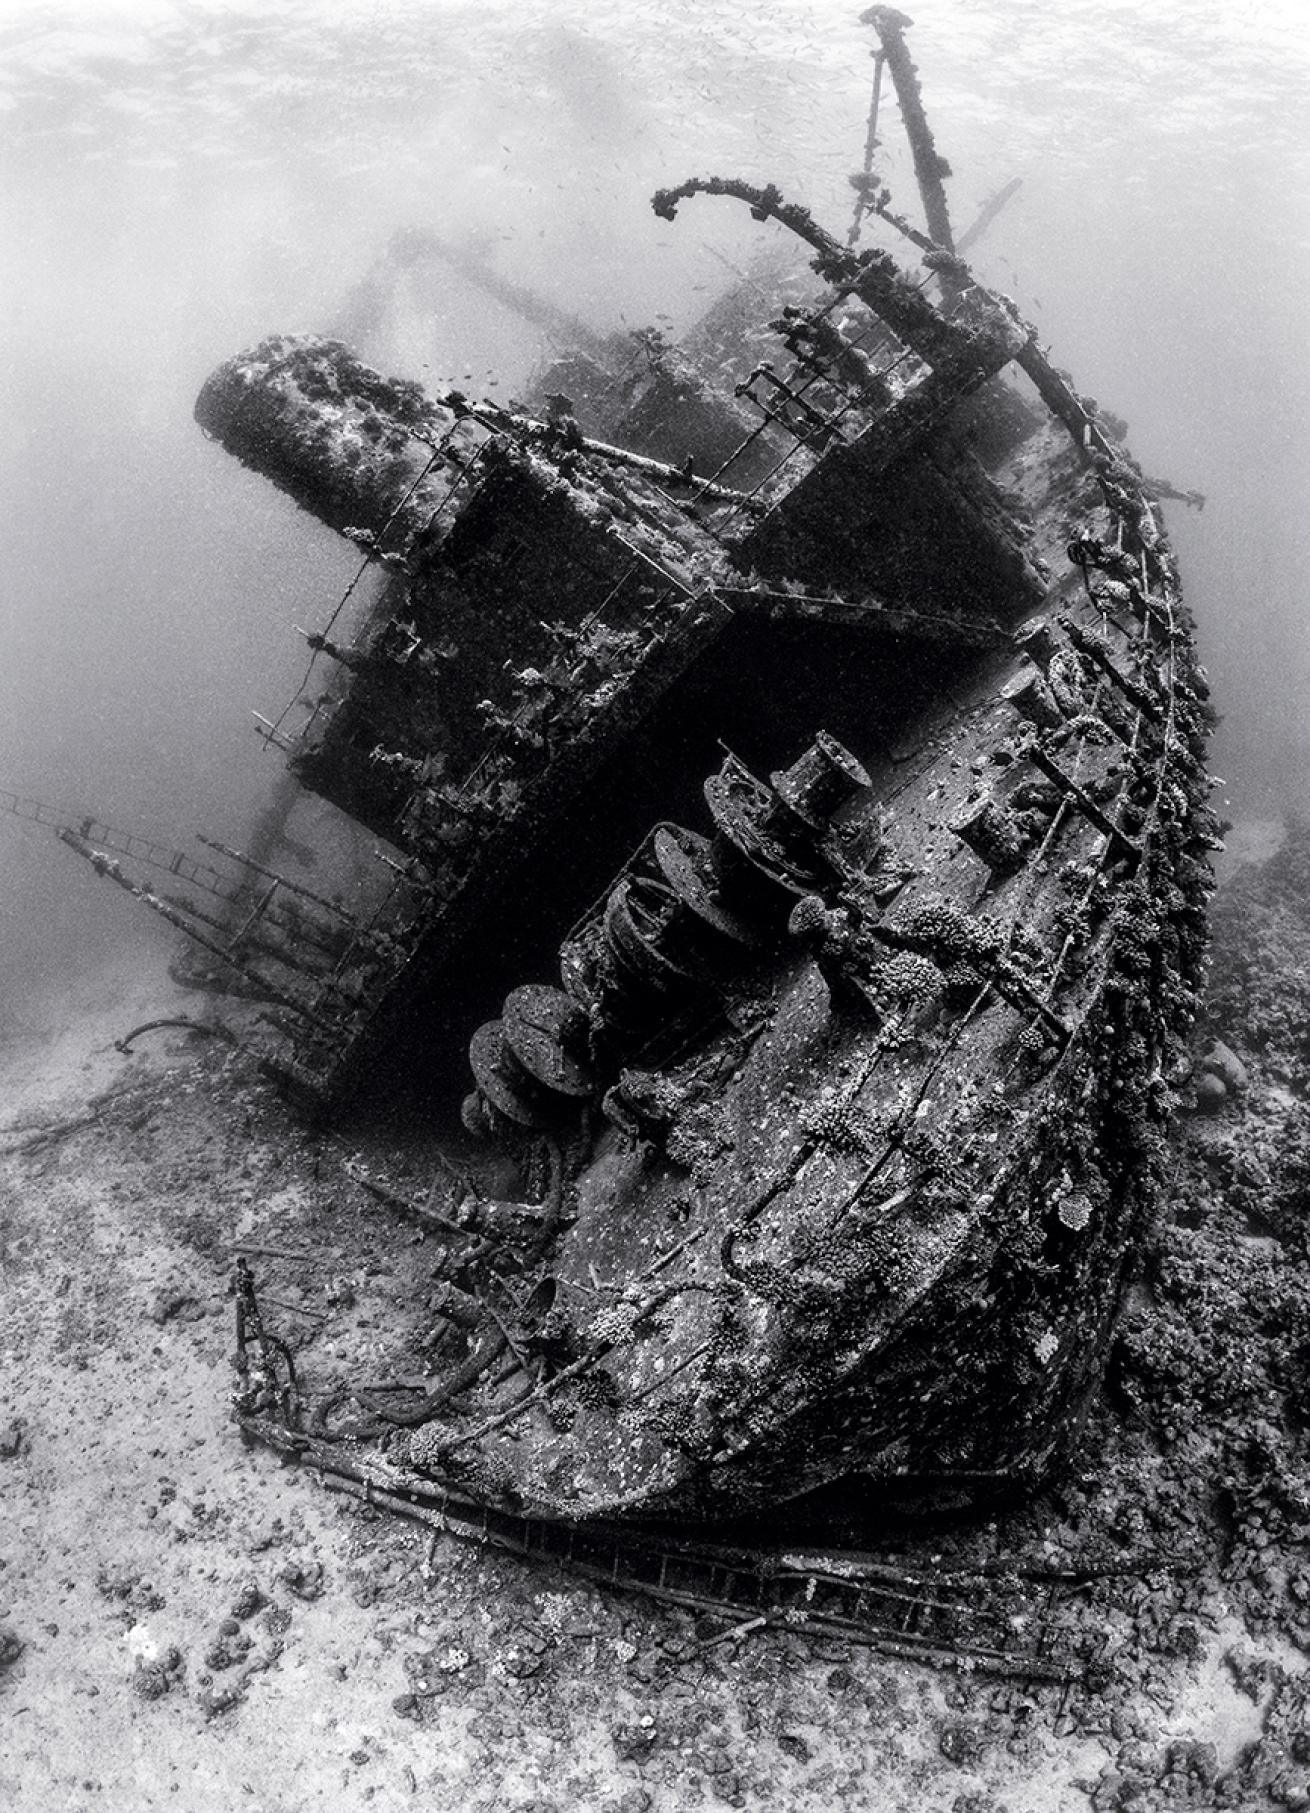 A black and white photo of a large shipwreck on the seabed.